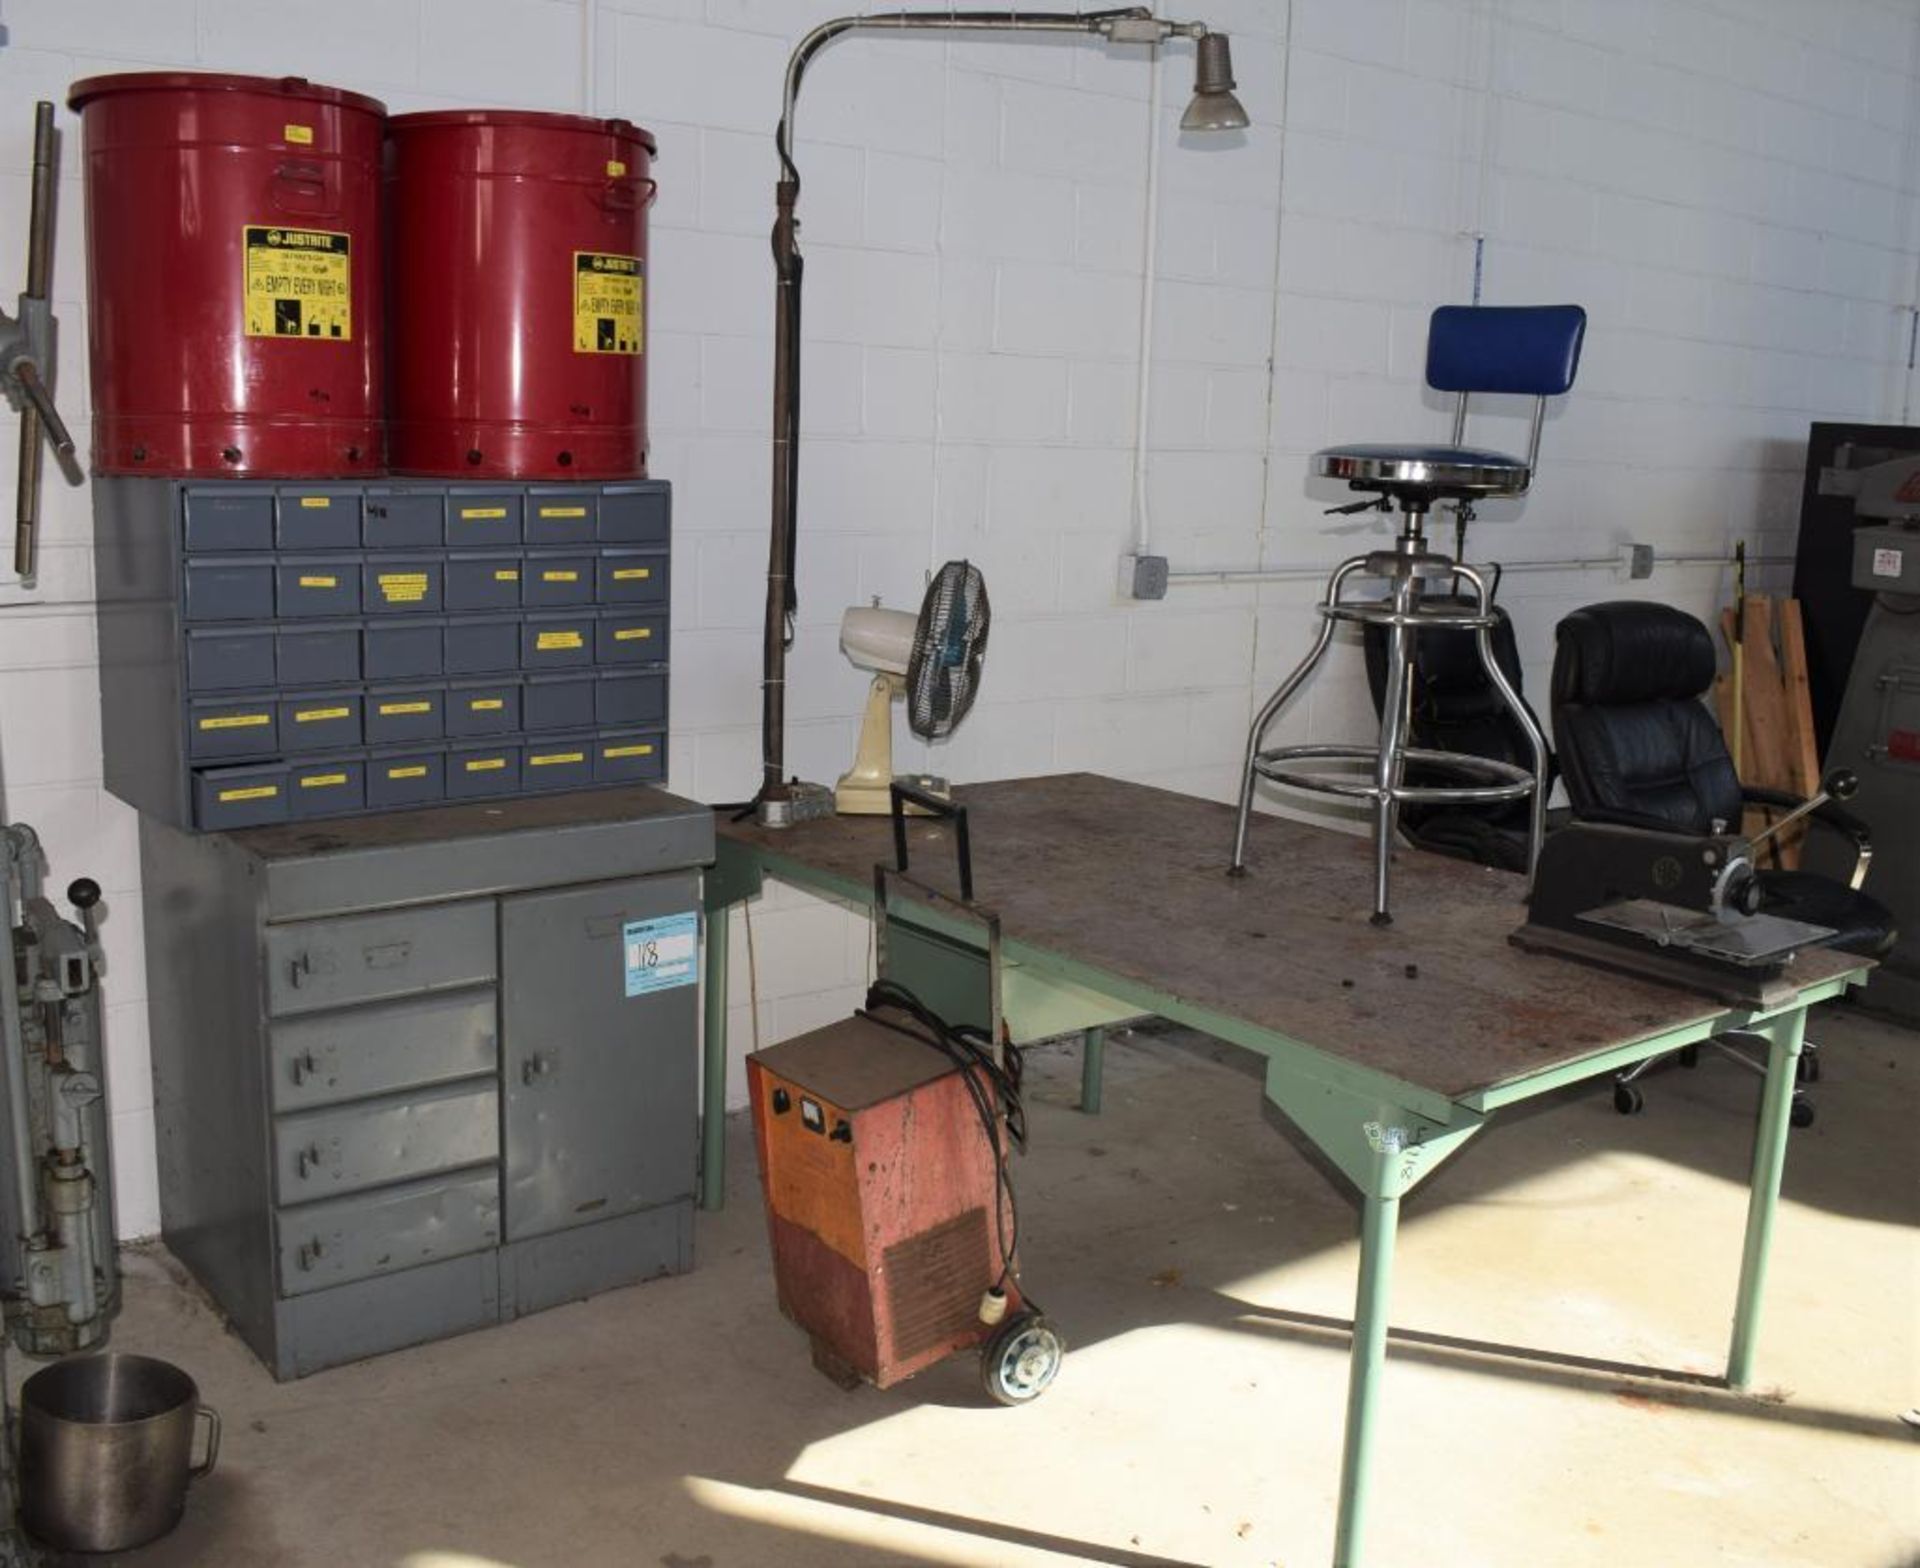 Lot Consisting Of: (1) Metal bench, (1) metal cabinet, (1) metal parts cabinet with contents. With (